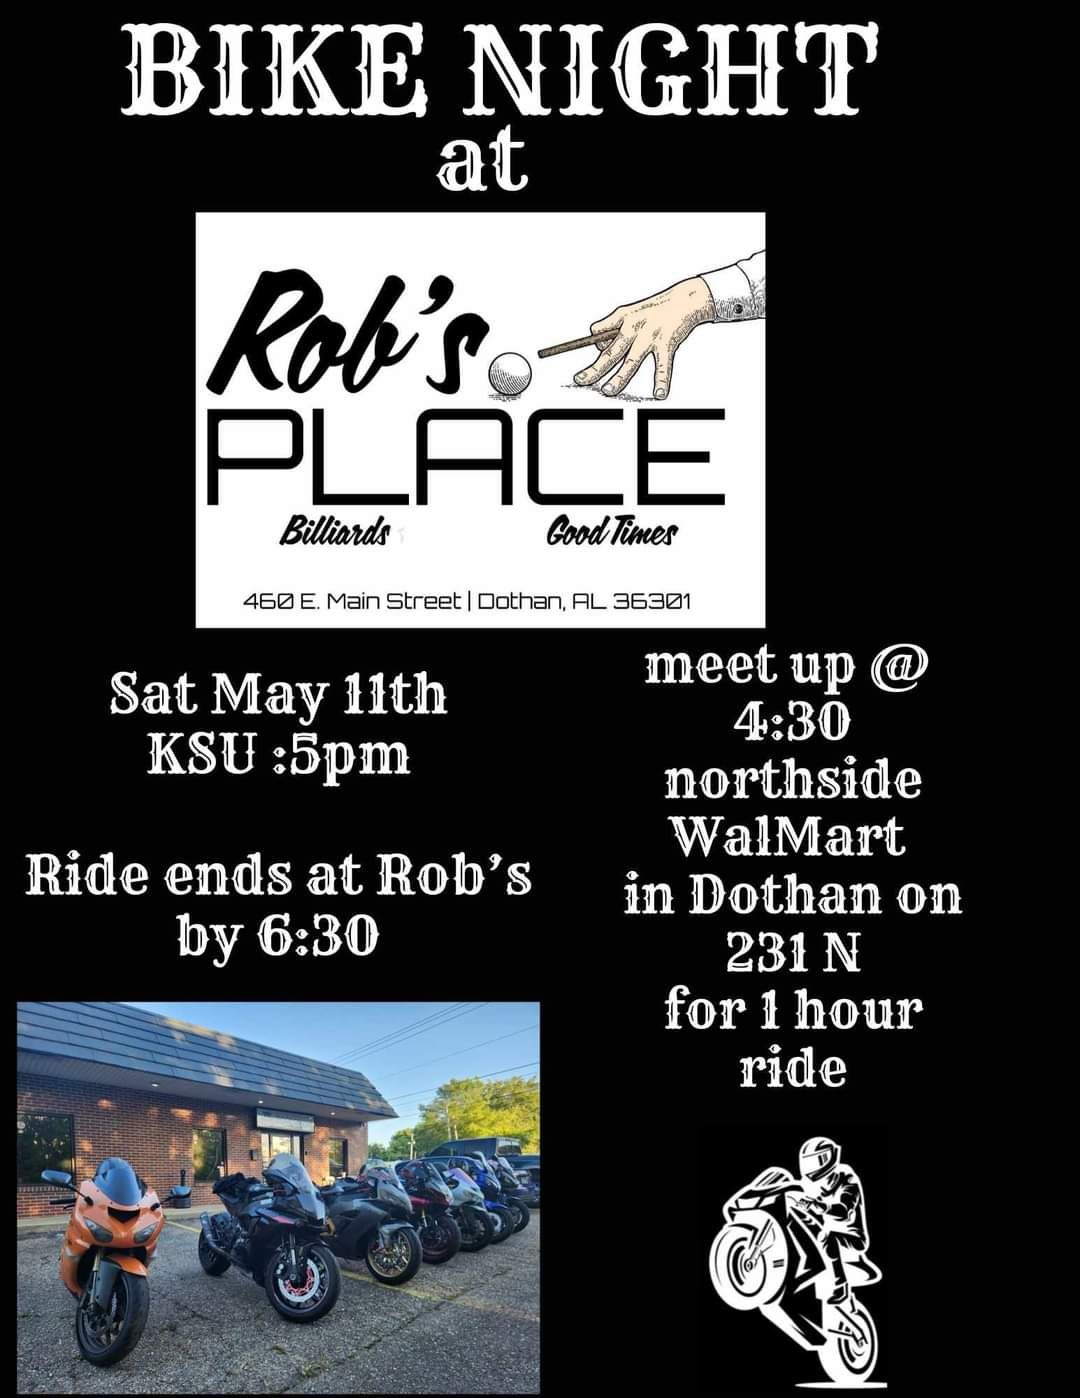 Bike night at robs place